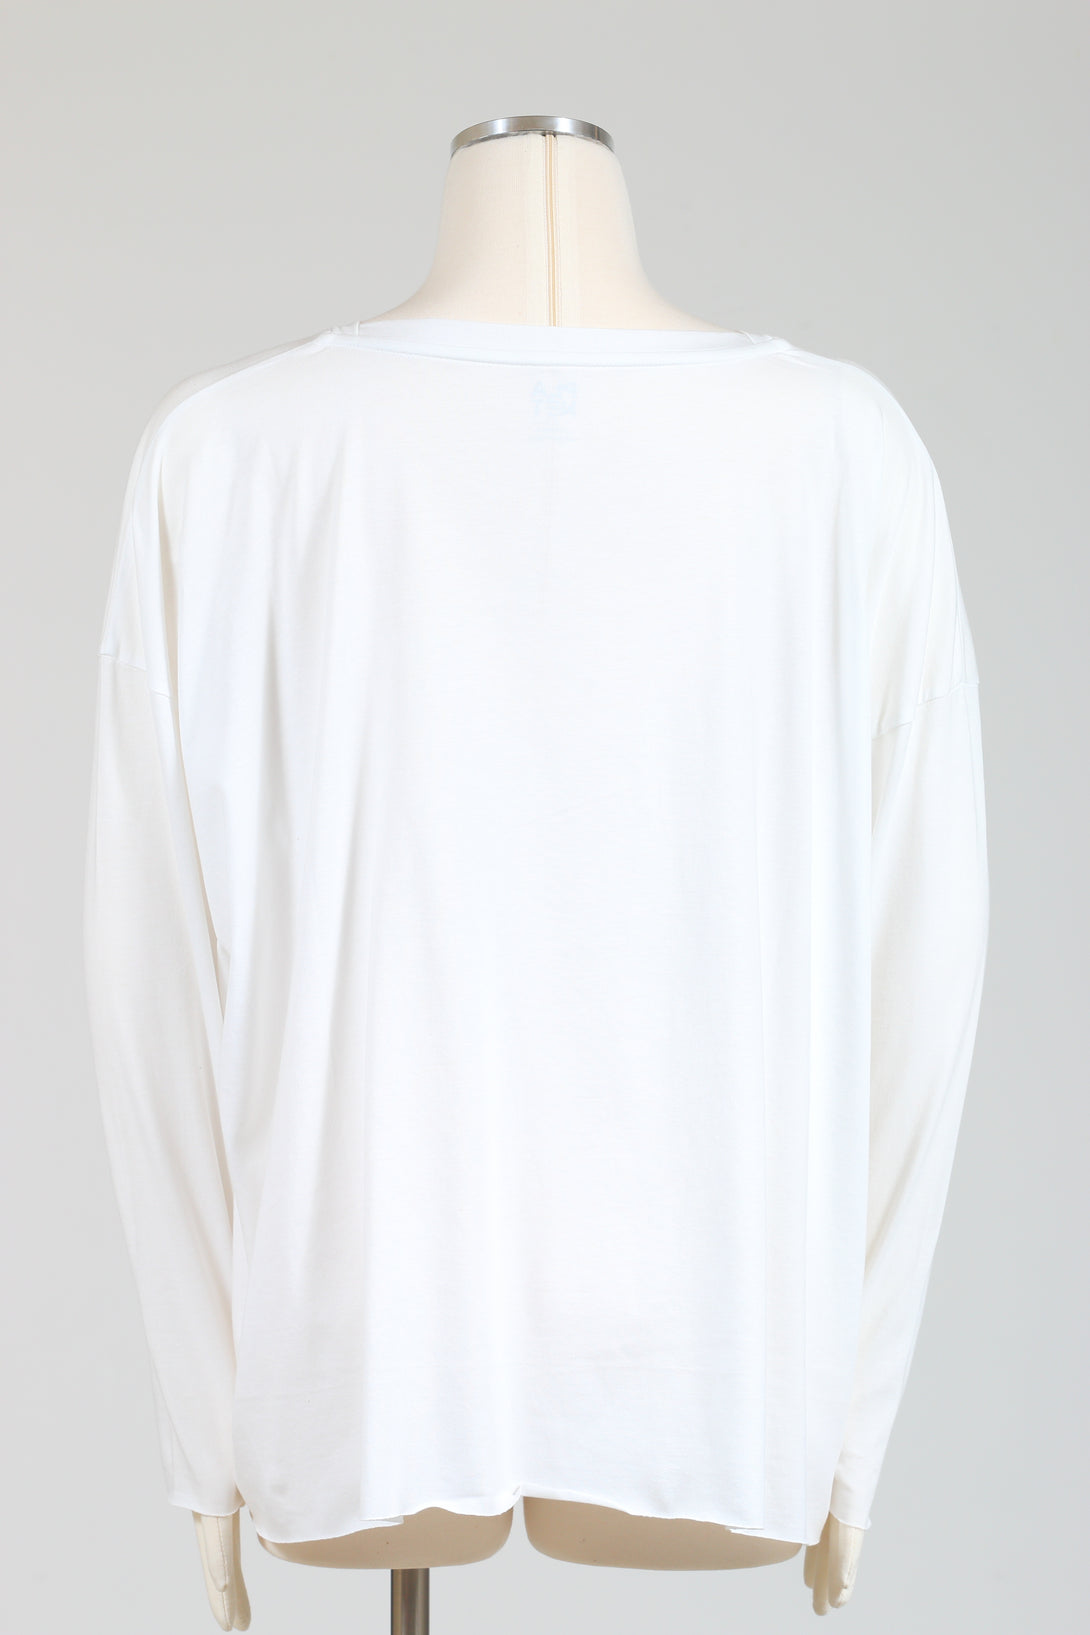 PLANET by Lauren G's Boxy Tee White